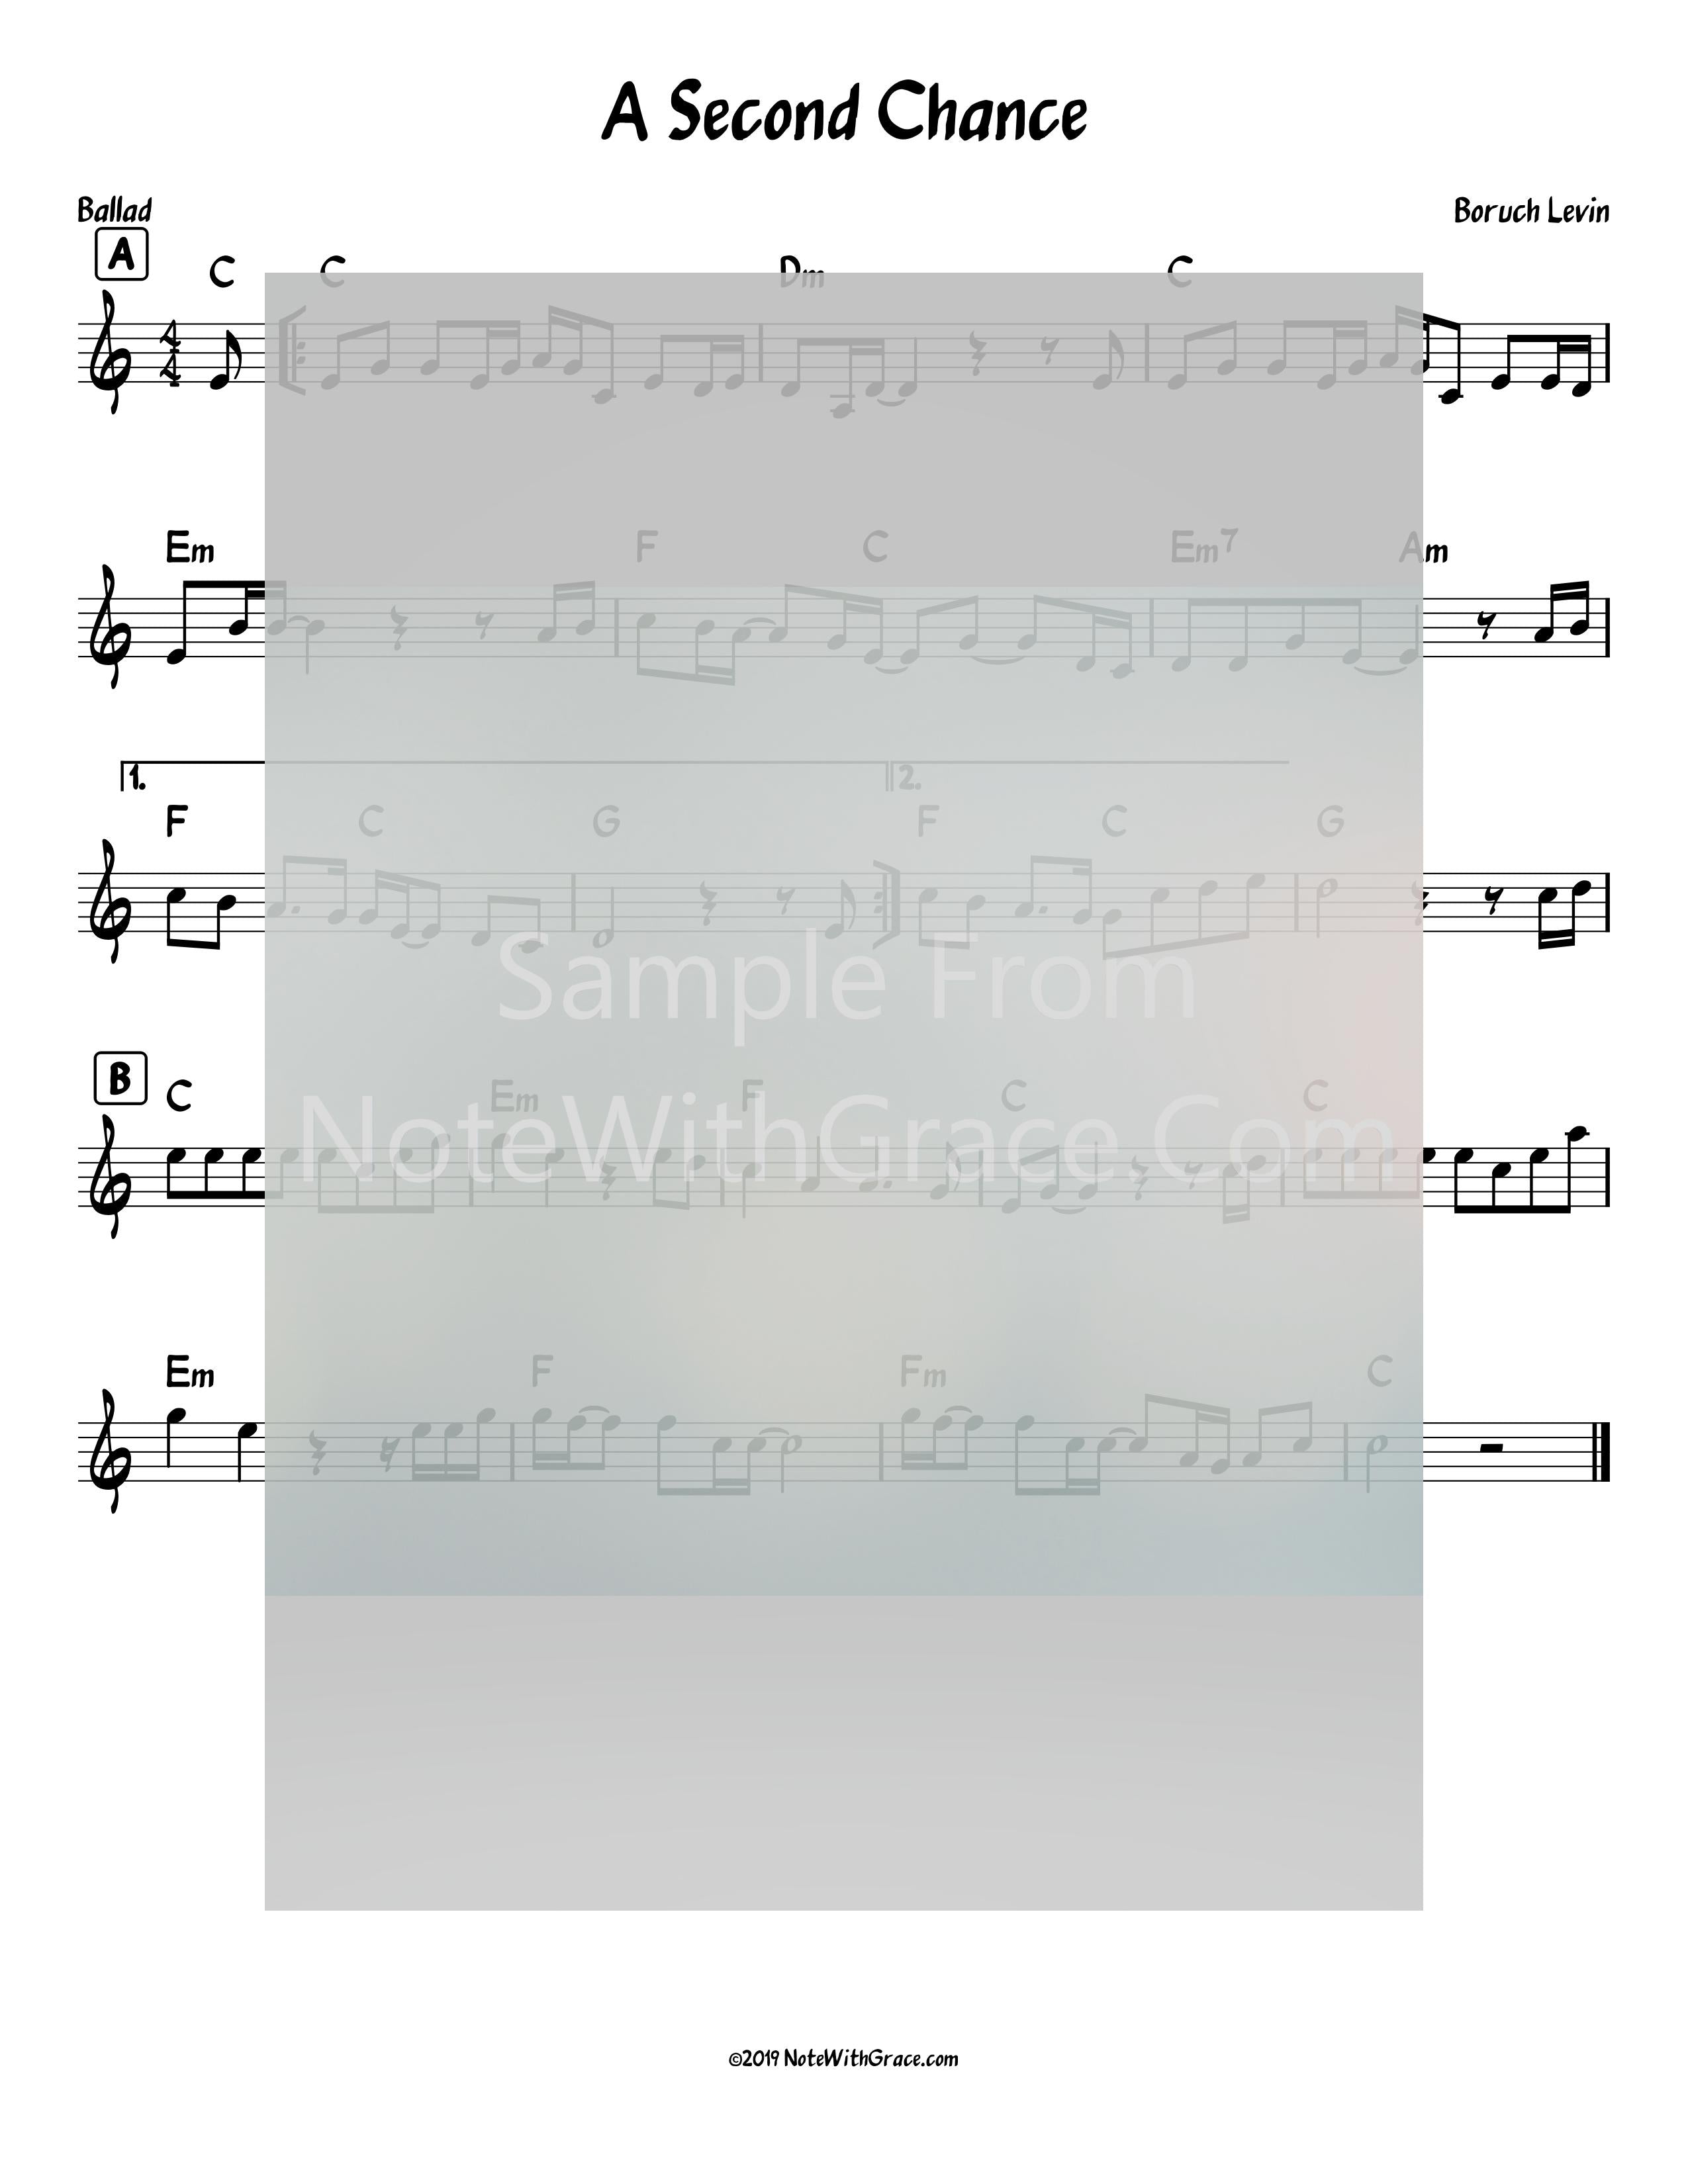 A Second Chance Lead Sheet (Baruch Levine) Album Peduscha Released 2018-Sheet music-NoteWithGrace.com